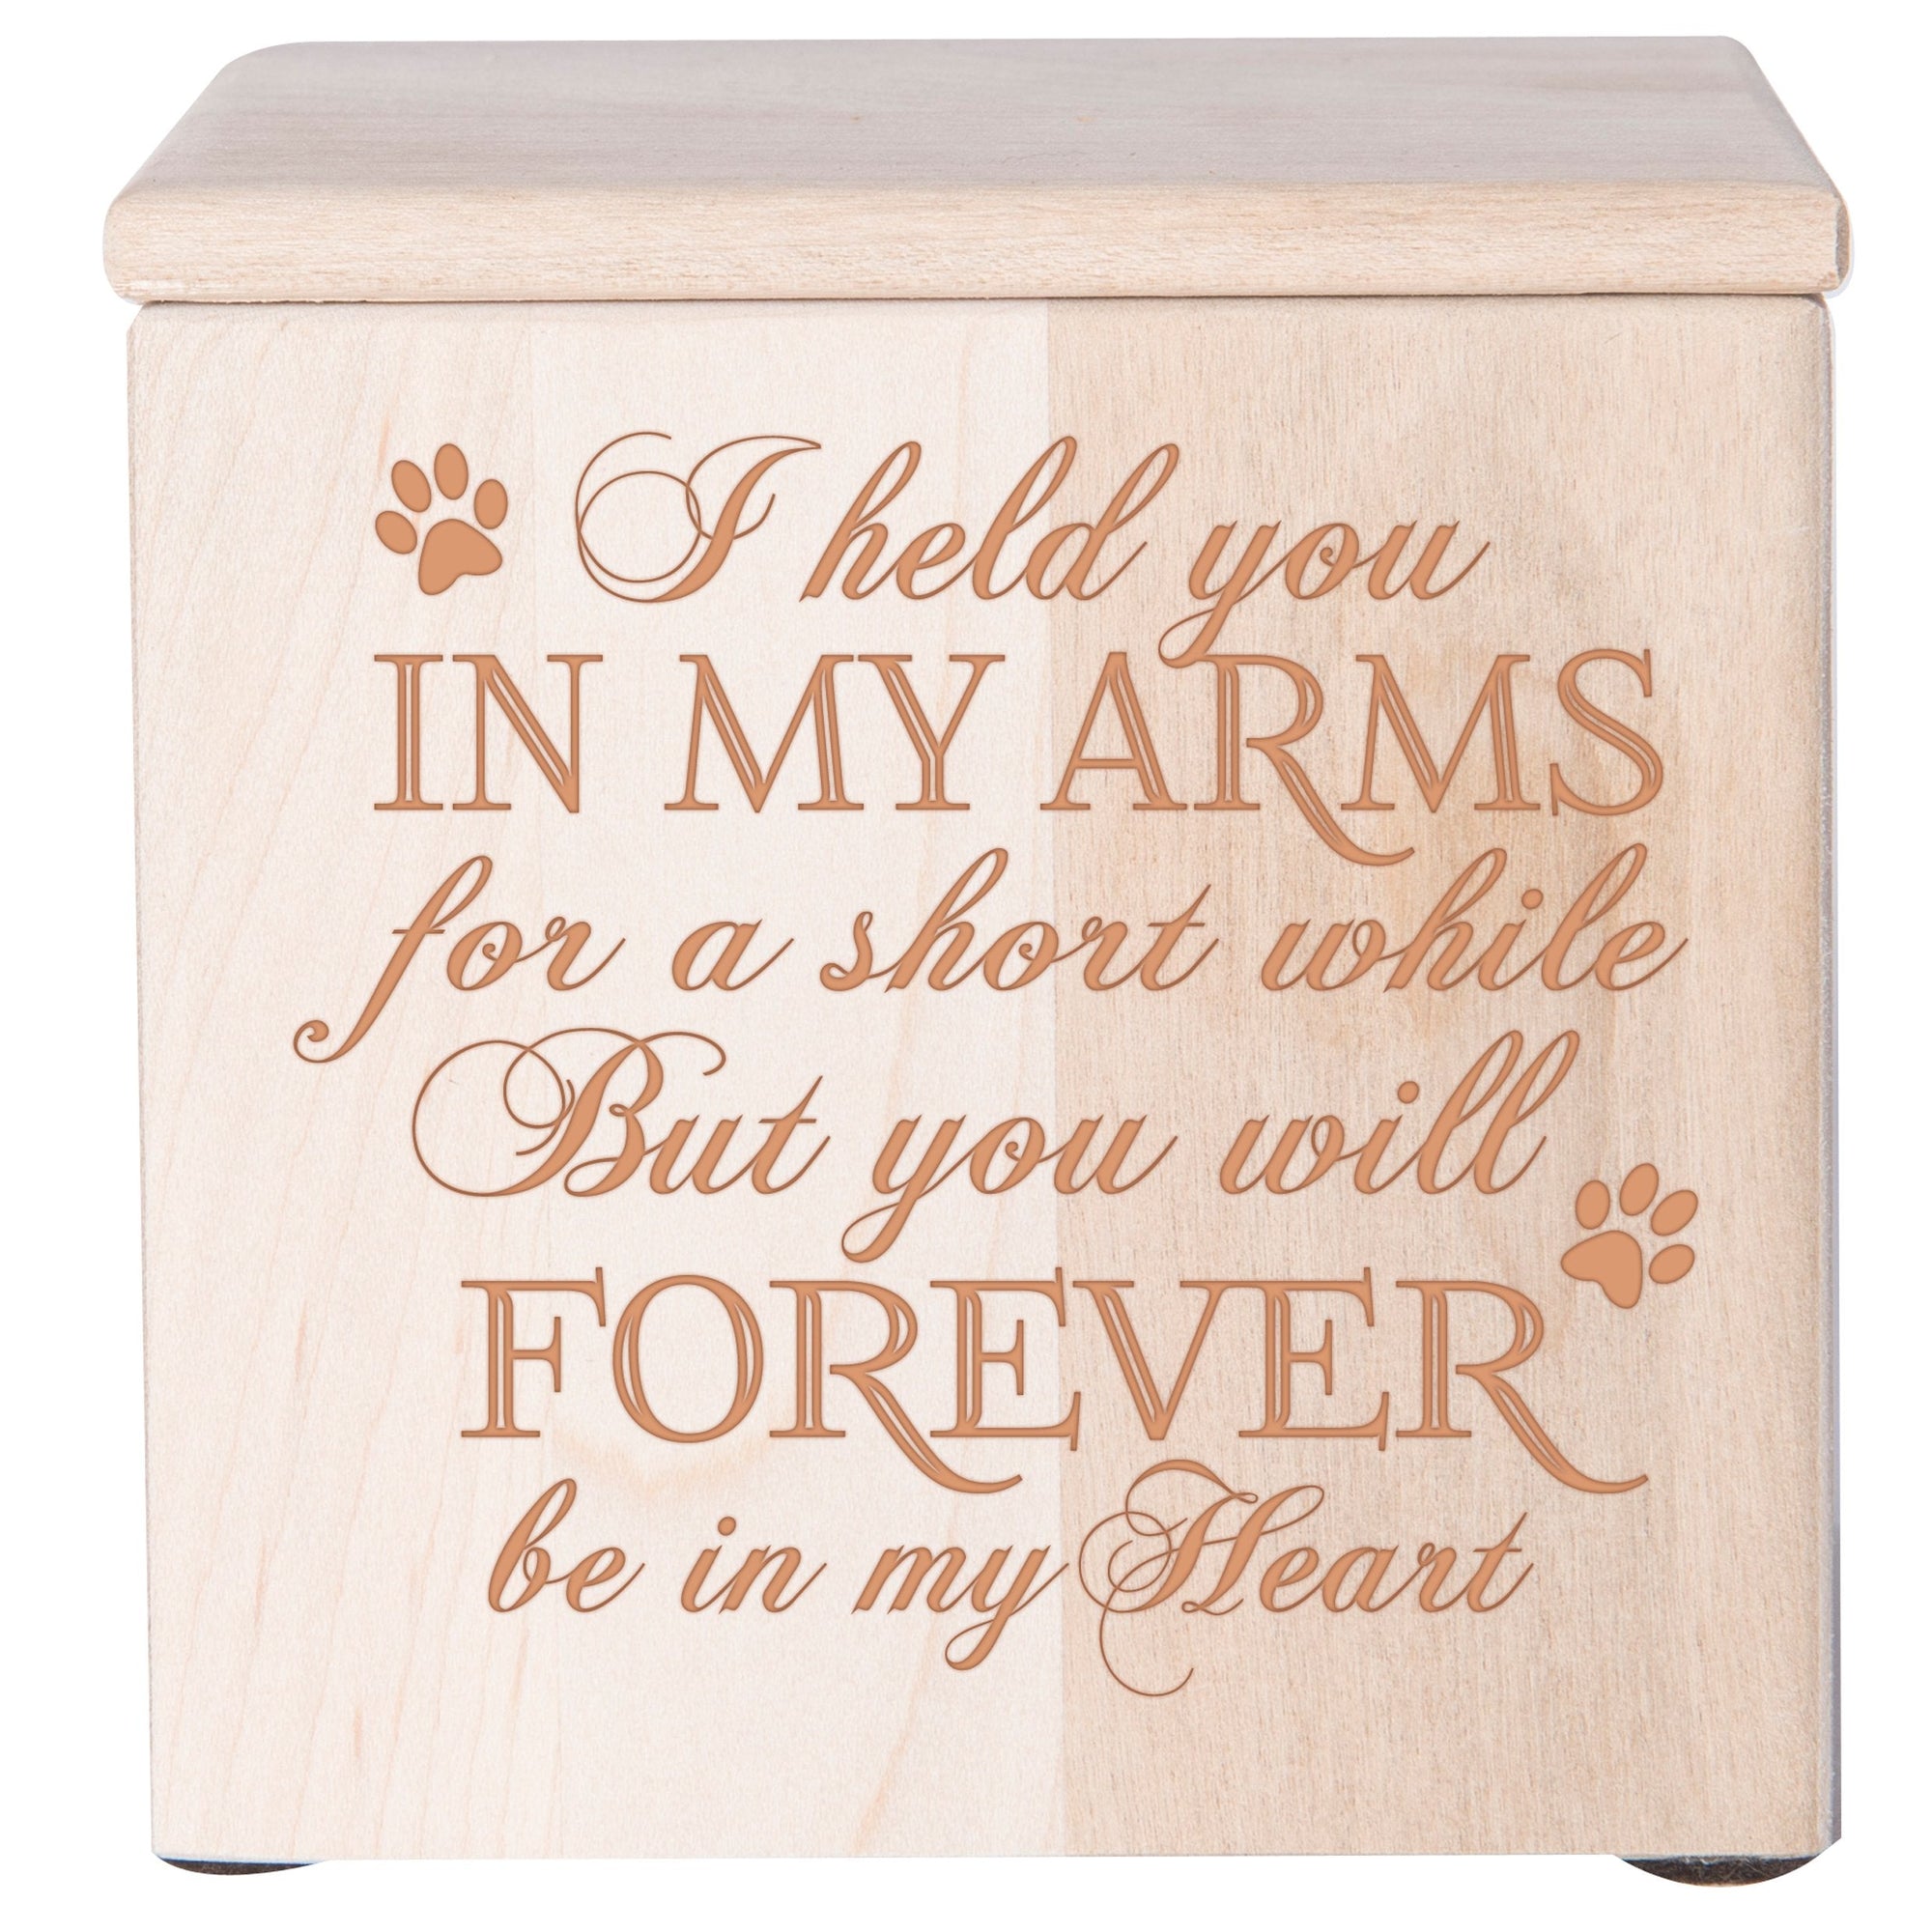 Maple Pet Memorial 3.5x3.5 Keepsake Urn with phrase "I Held You In My Arms"